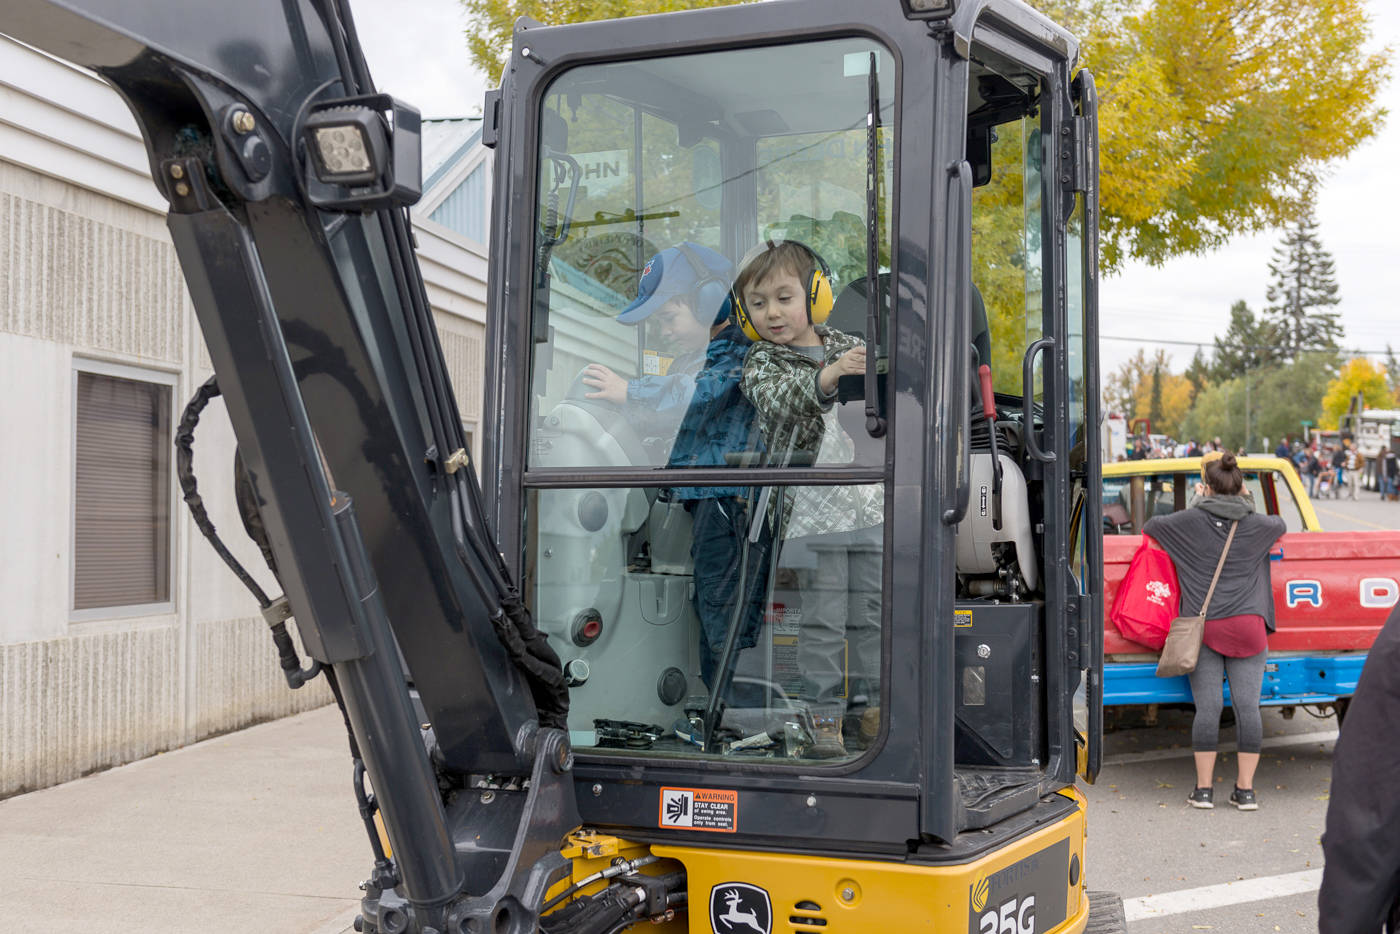 8742308_web1_171004-QCO-Touch-a-truck-photopage_10